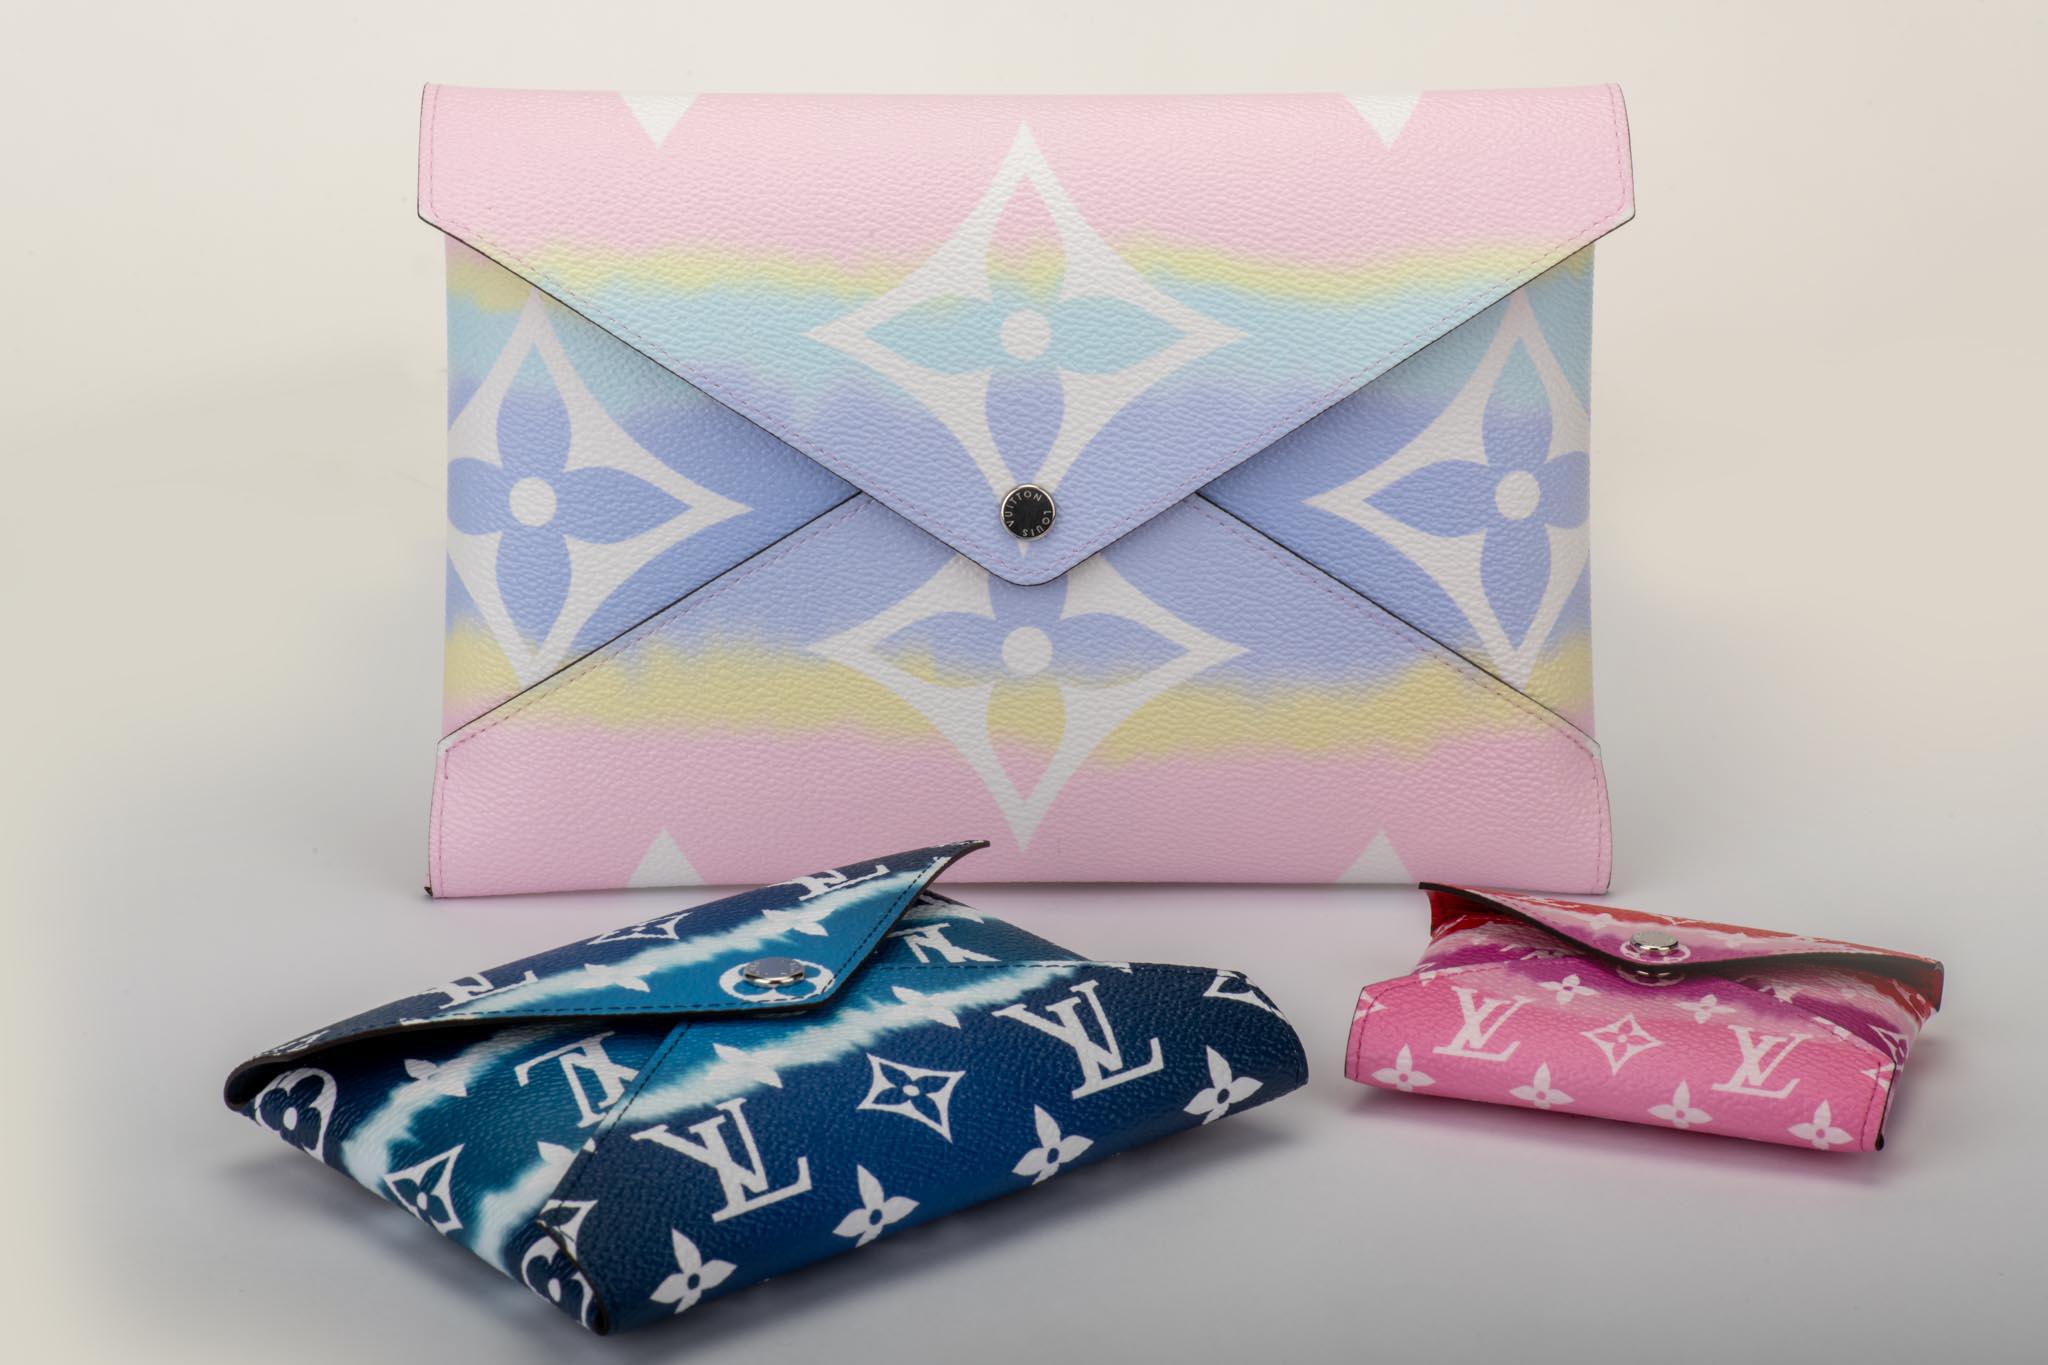 Louis Vuitton sold out worldwide Escale set of three clutches with tie die monogram design. 2020 collection. Comes with dust cover and box.